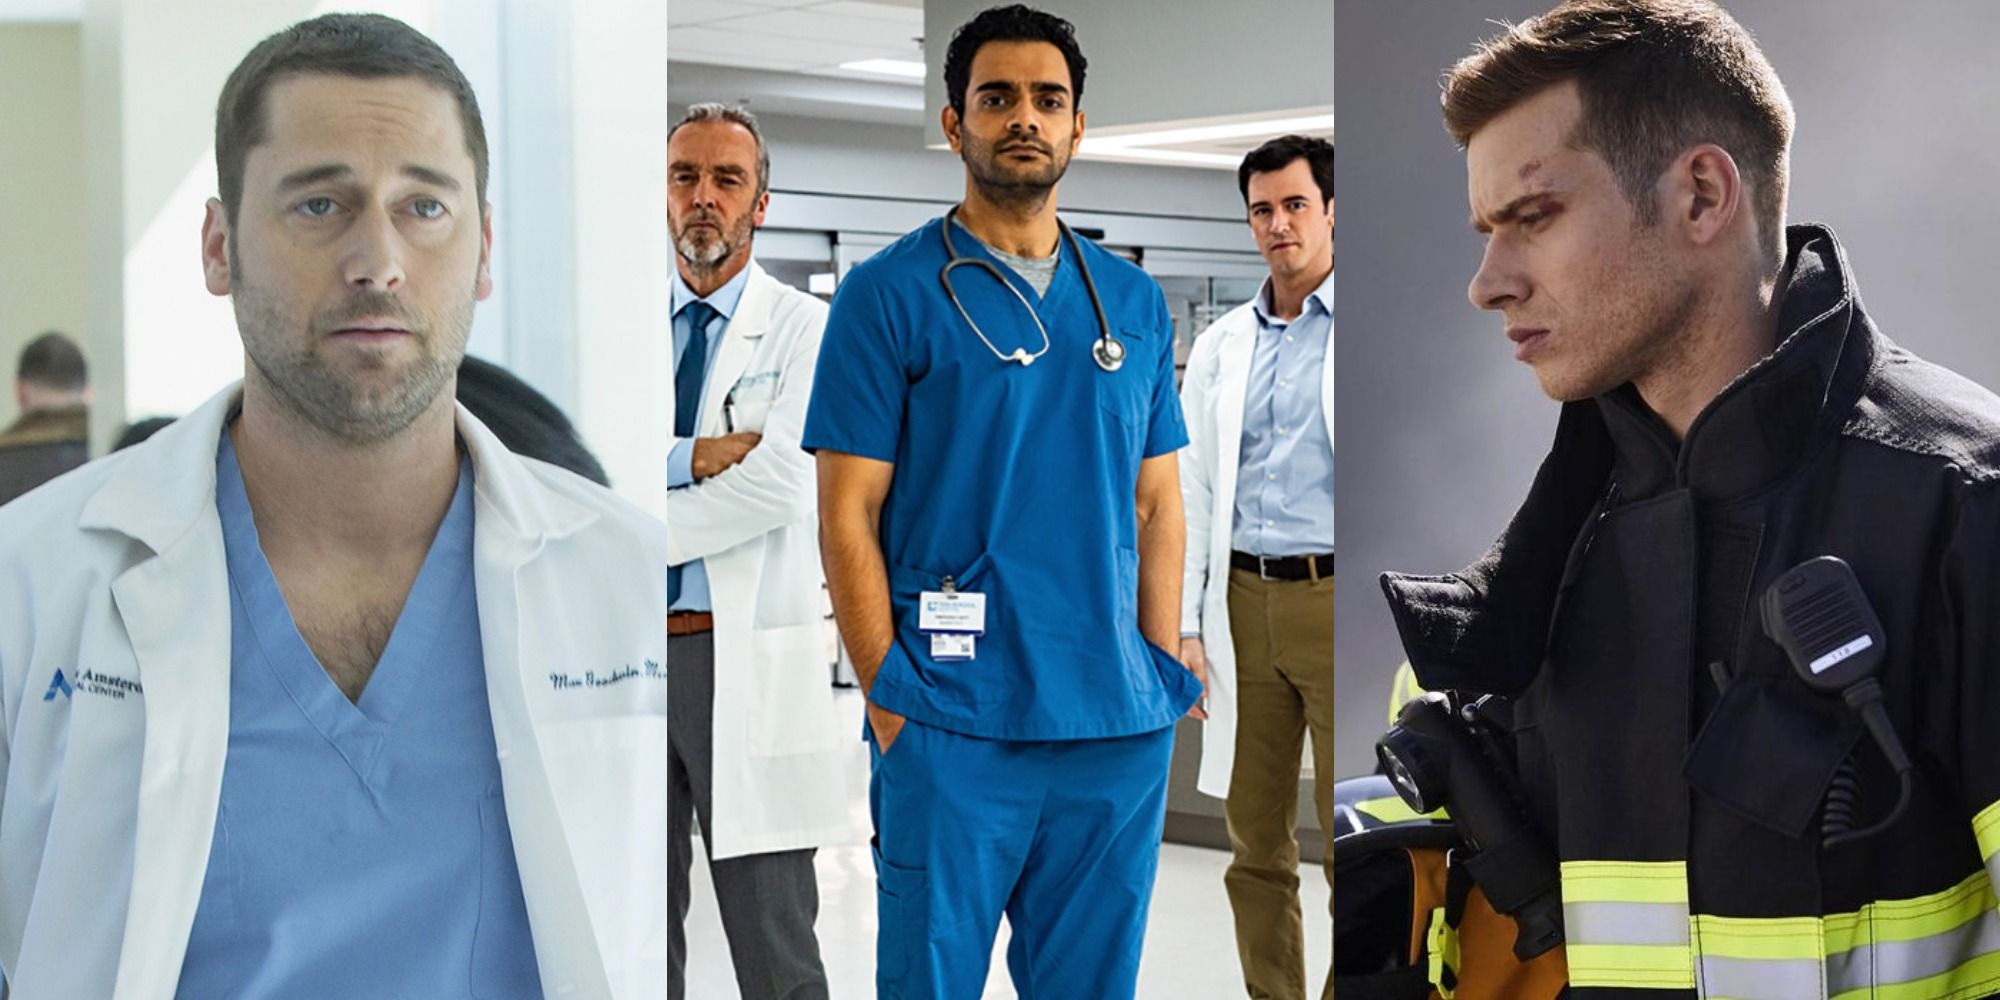 Main characters from New Amsterdam, Transplant and 9-1-1 collage